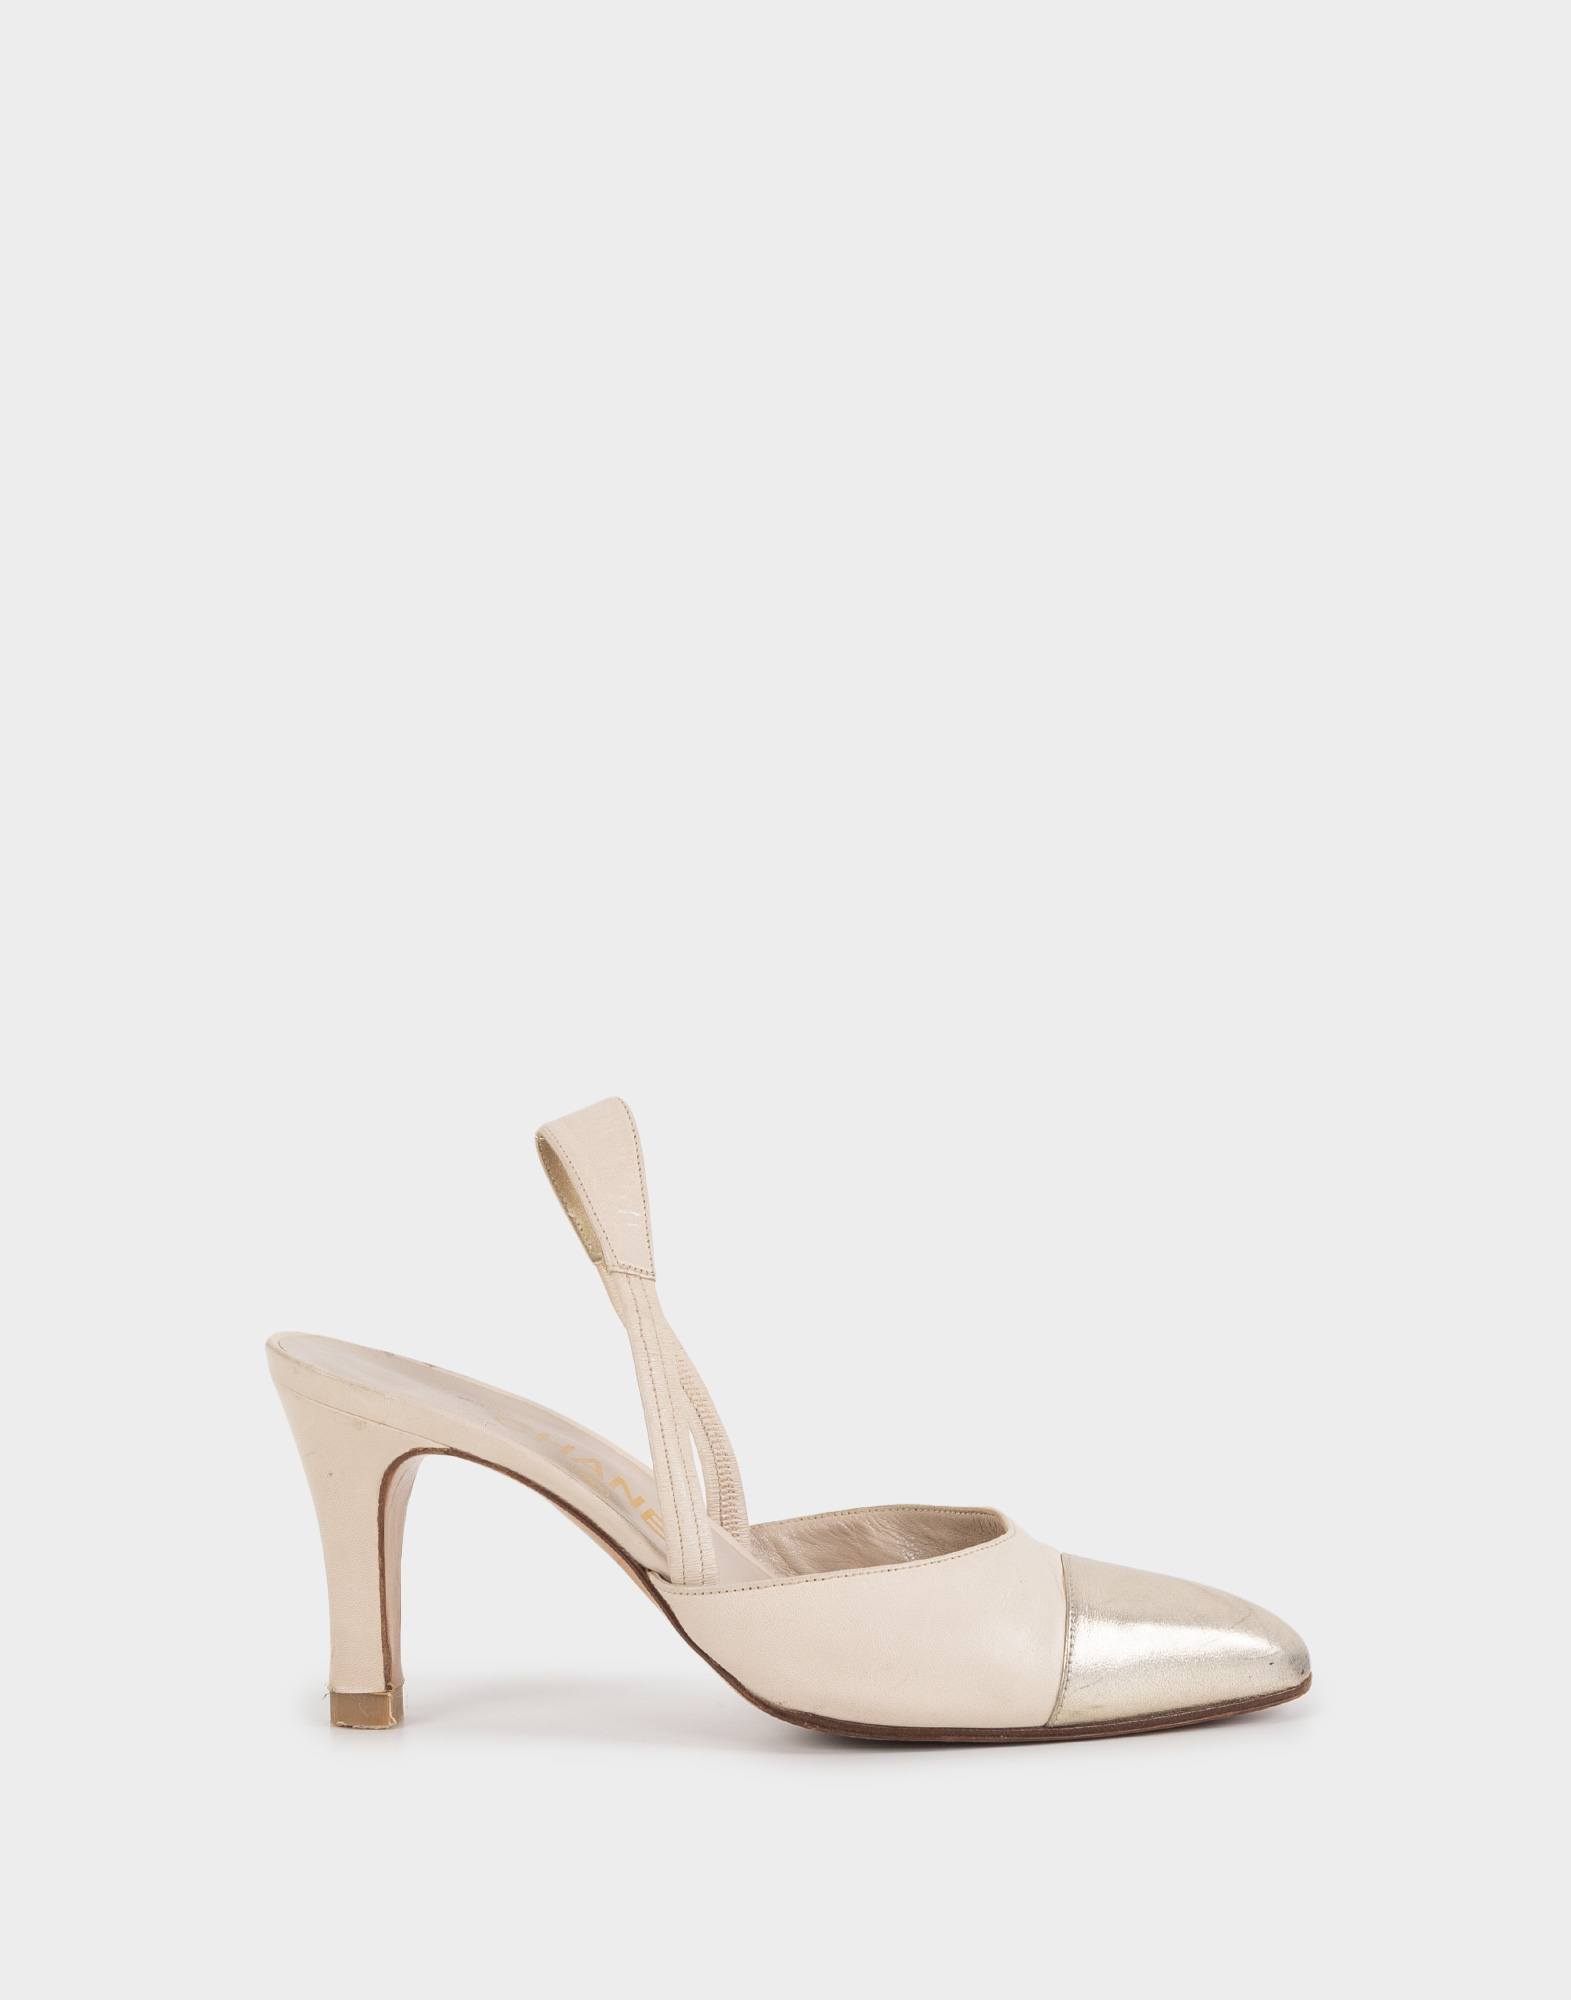 ivory leather heel shoes with strap and golden toe